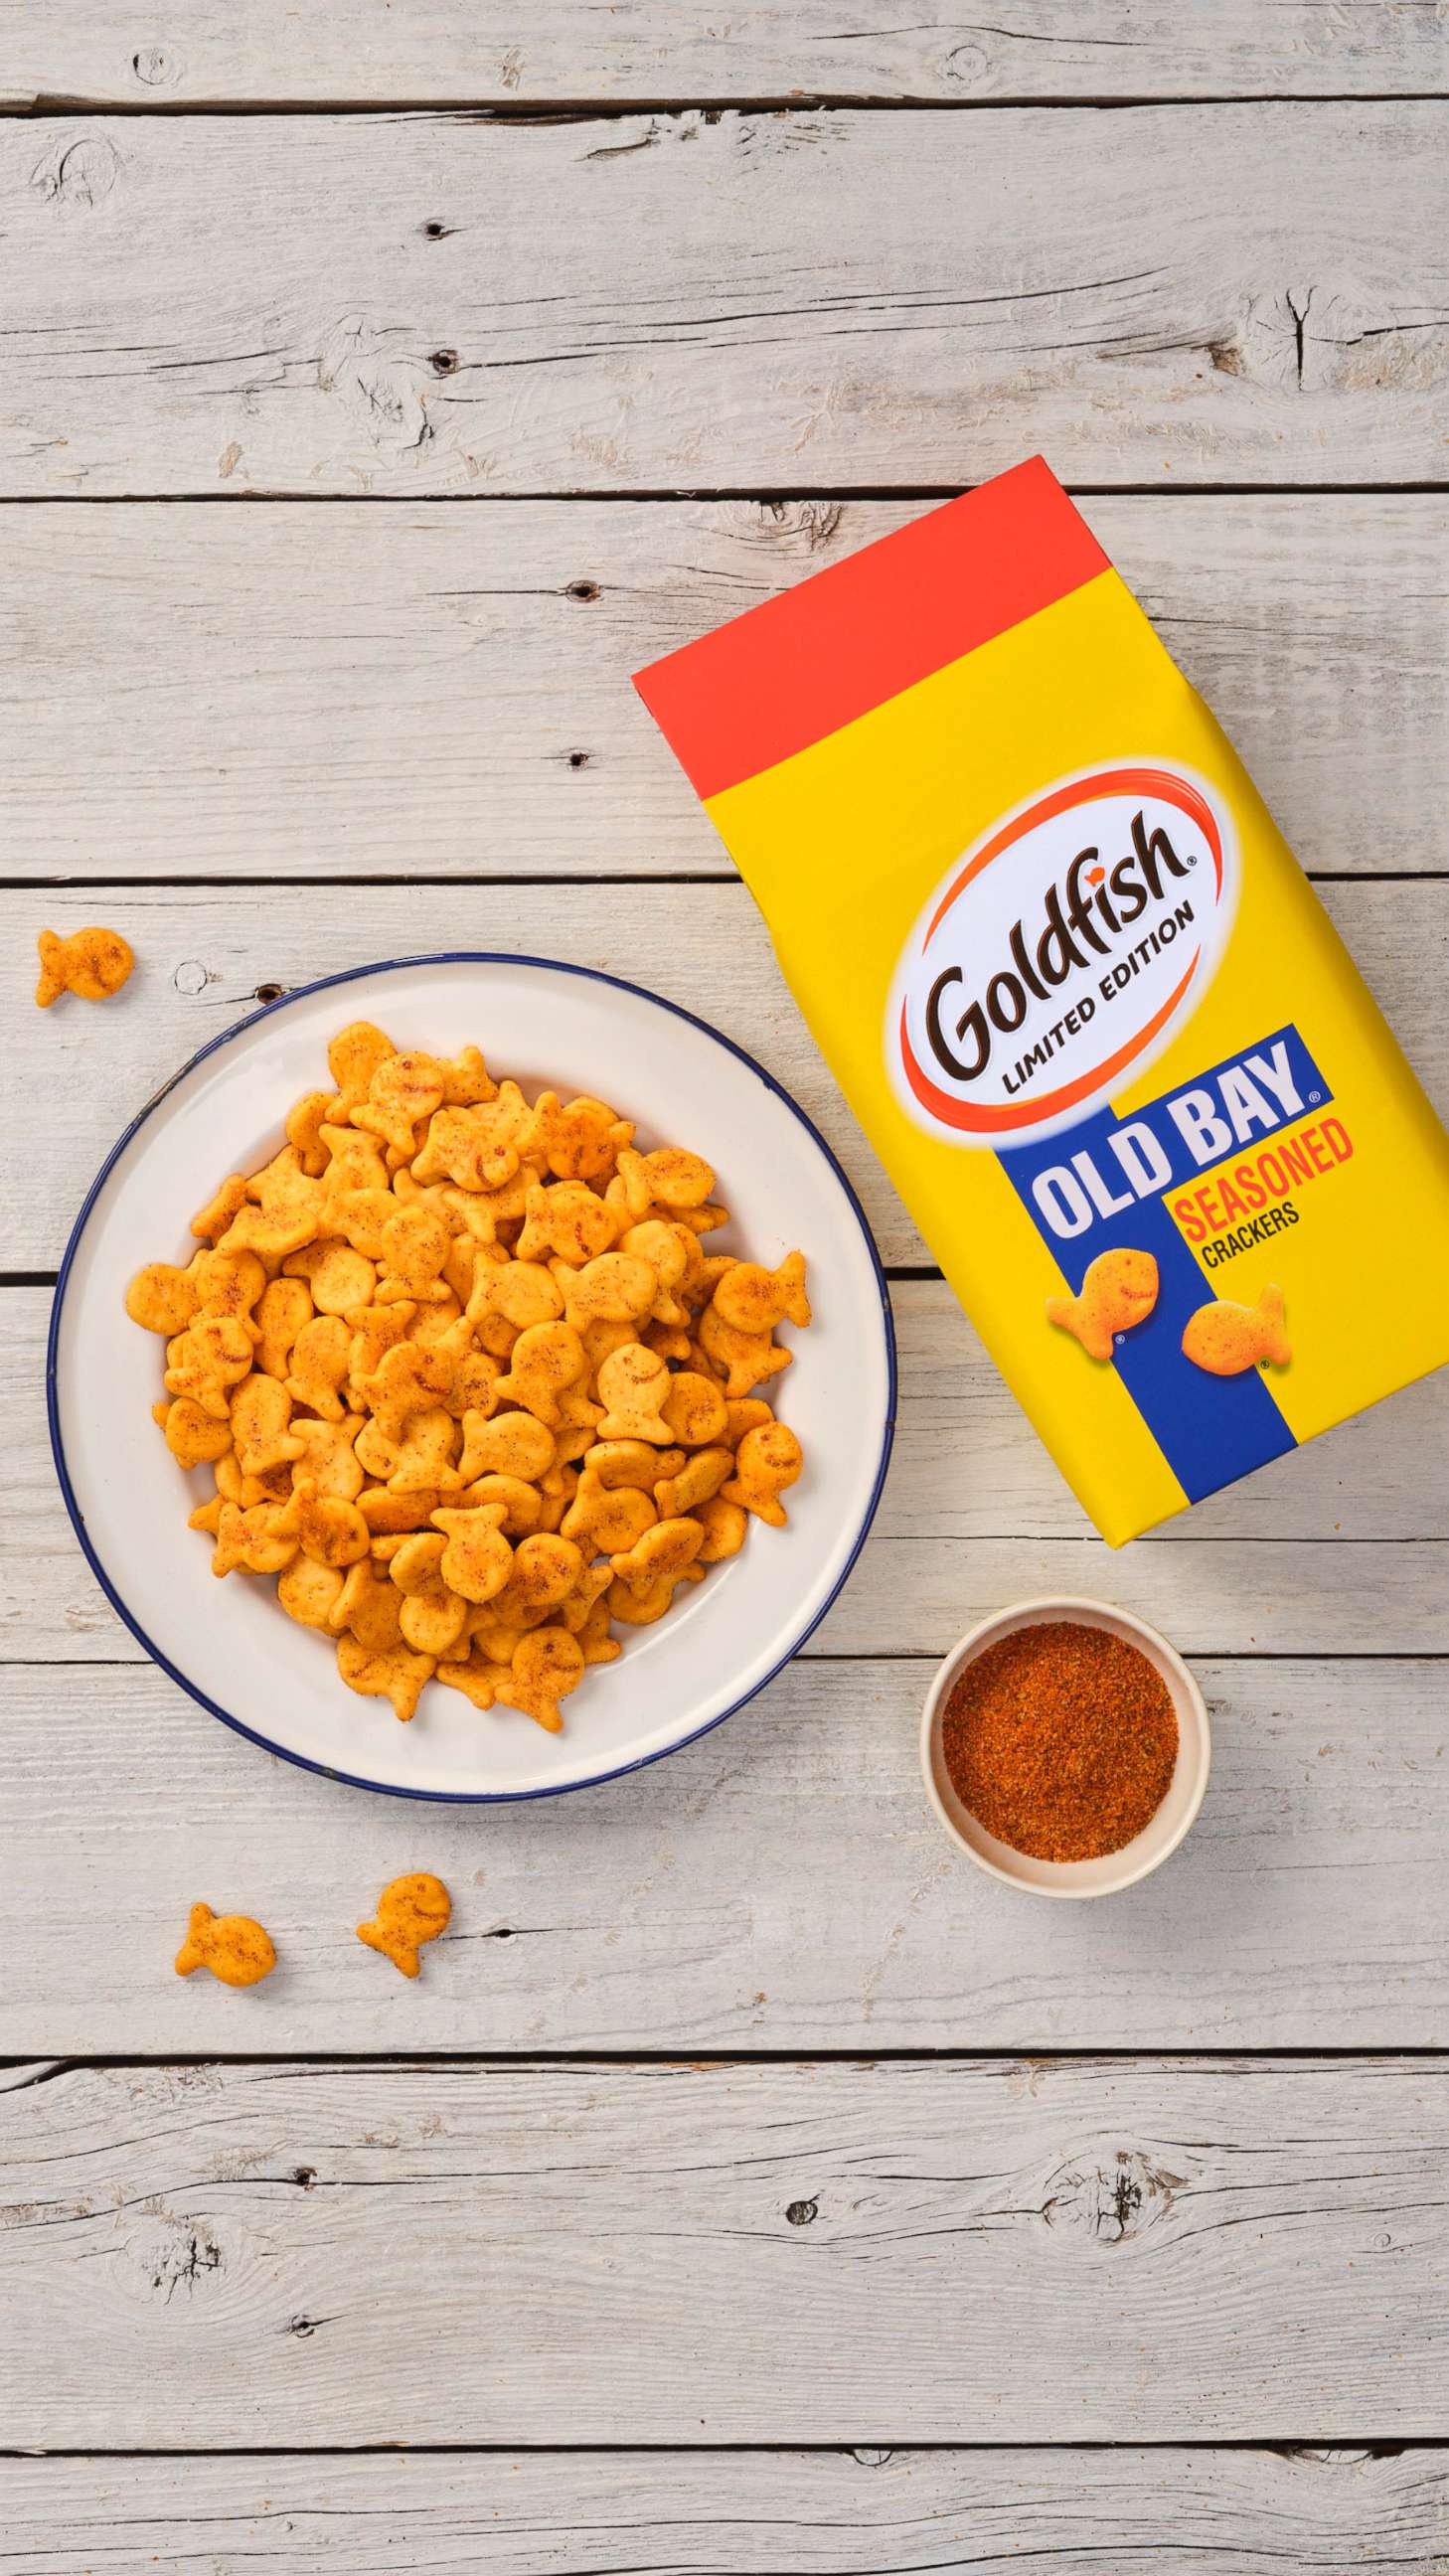 PHOTO: New limited-edition Goldfish with Old Bay seasoning.